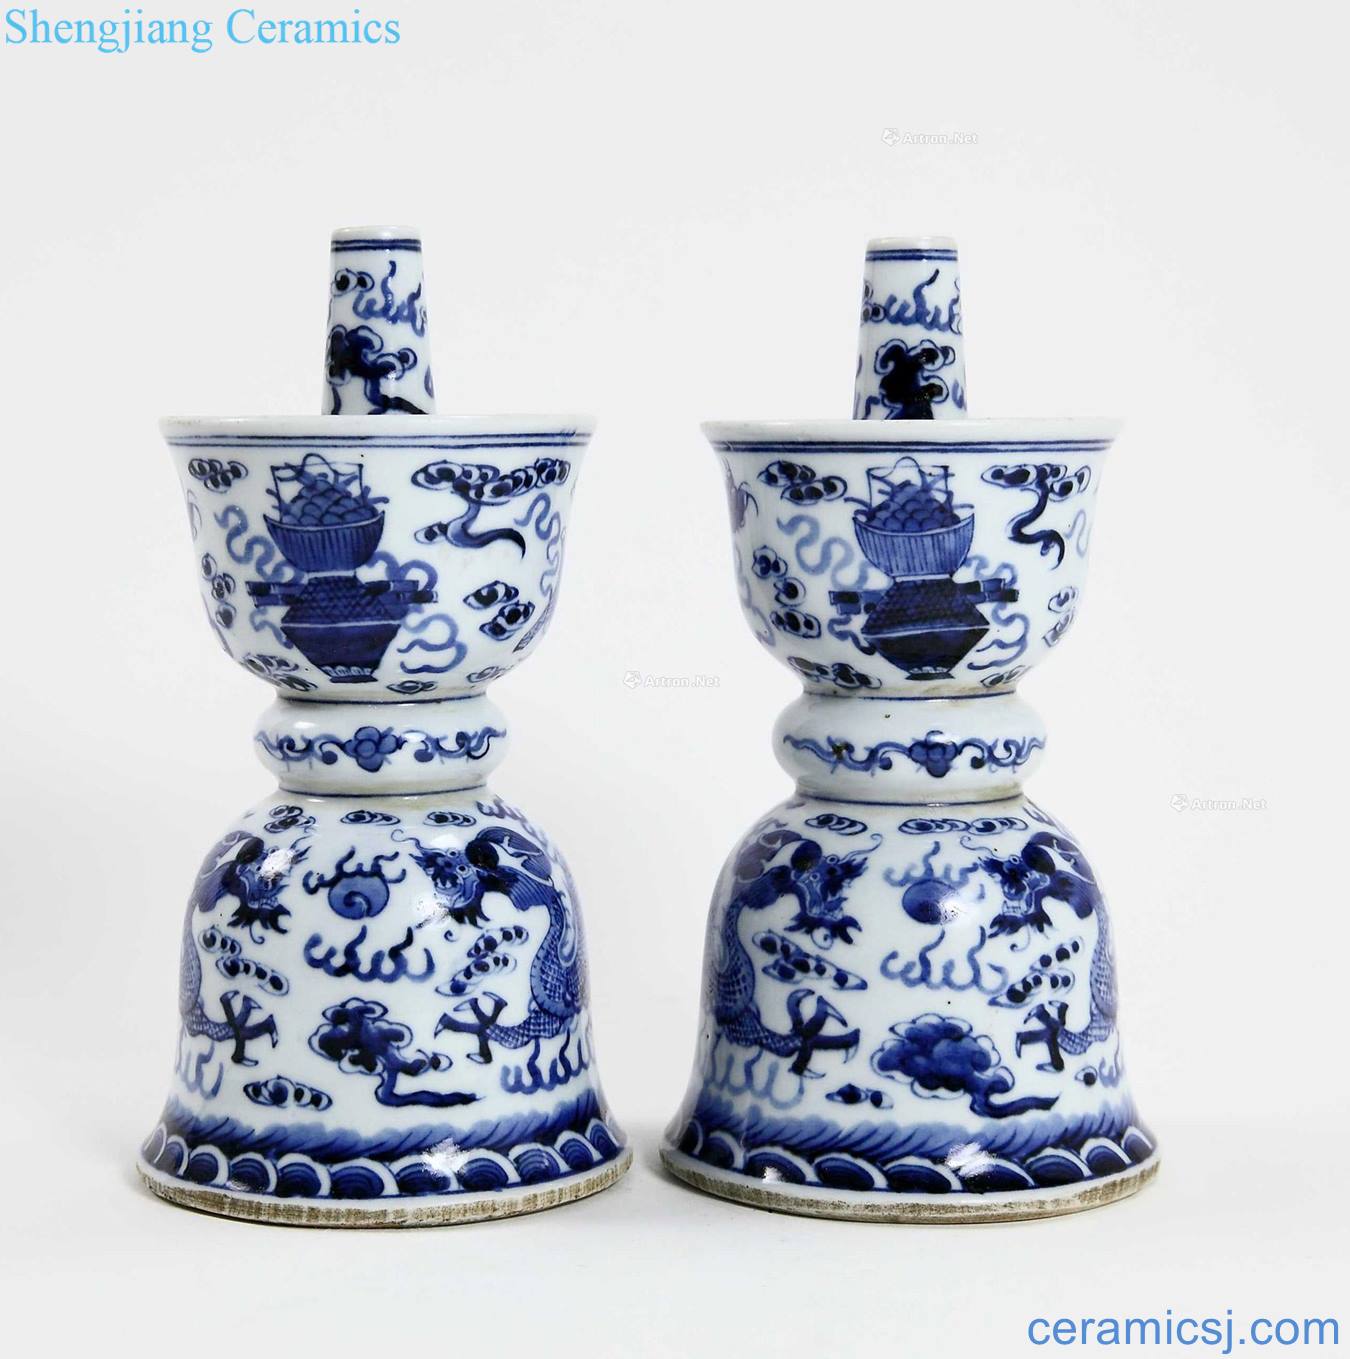 Qing dynasty middle-late Blue and white dragon candlestick (a)